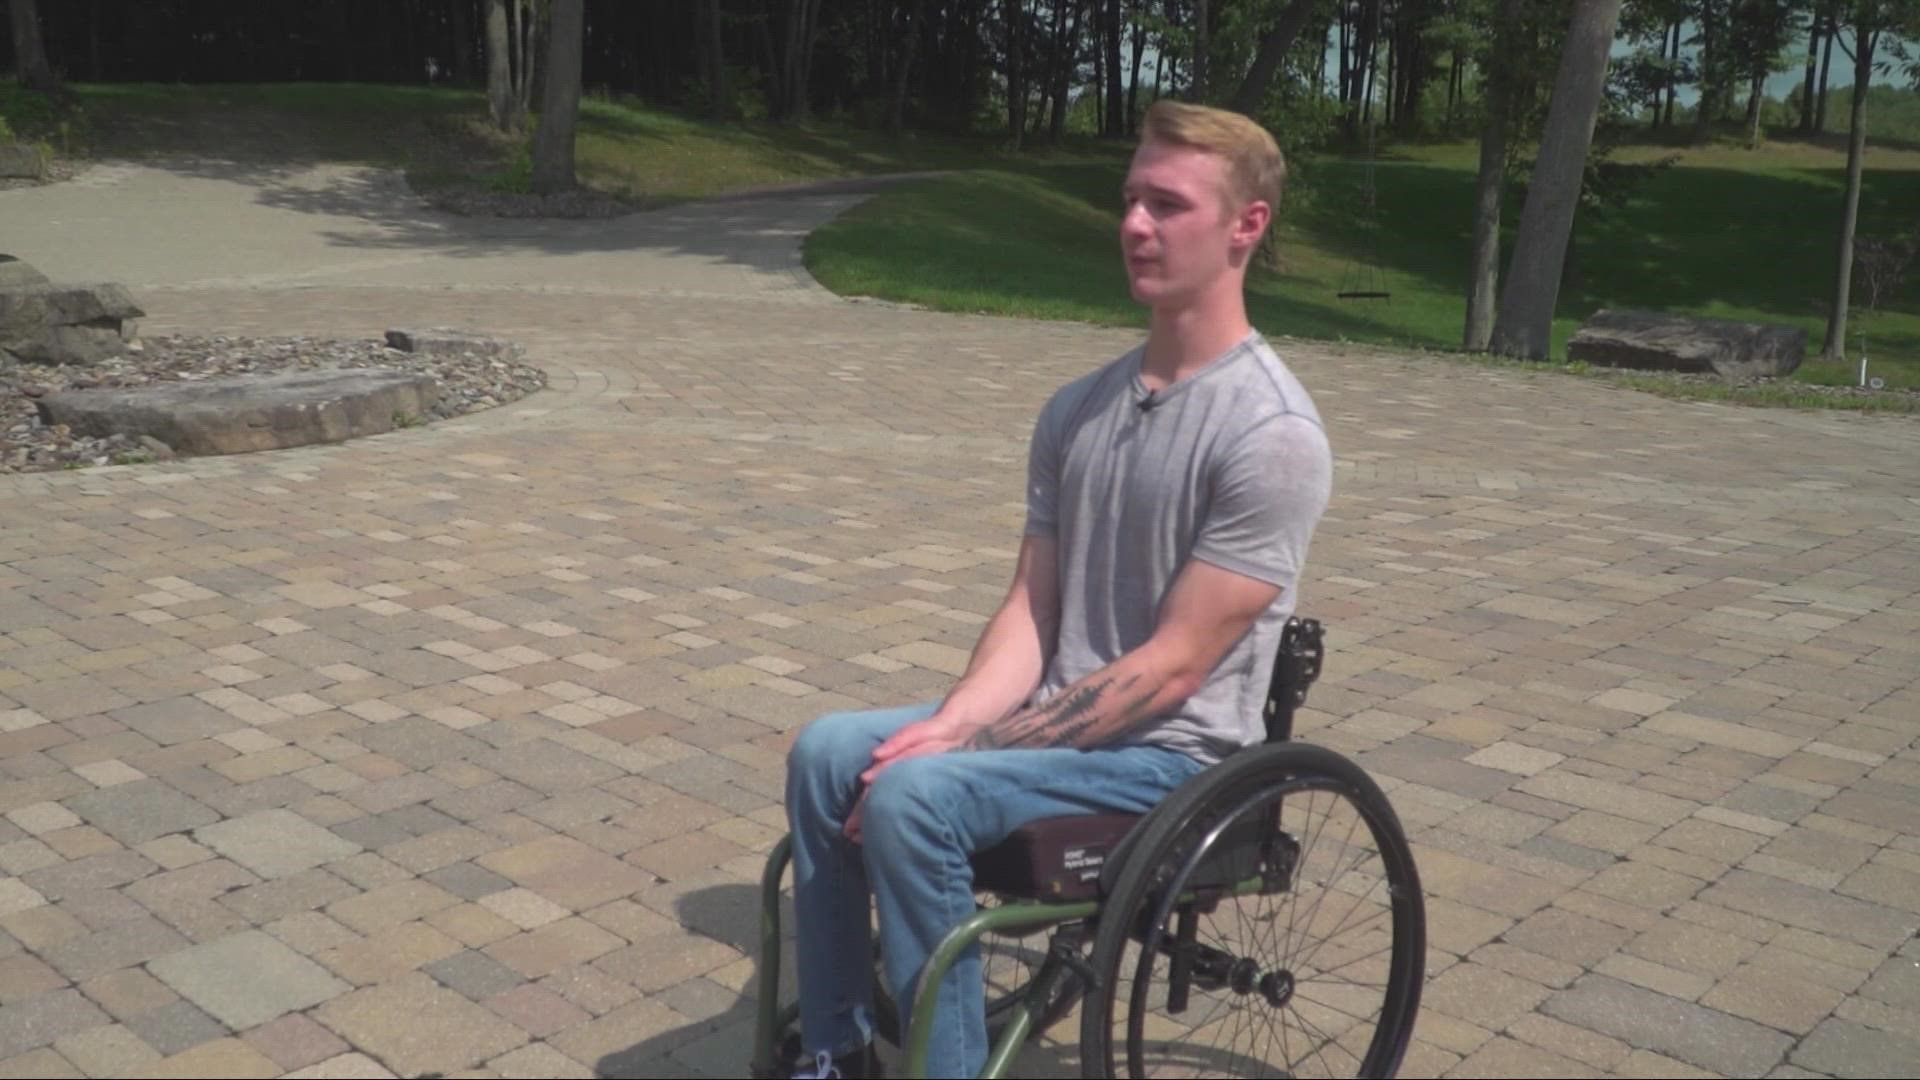 Alex Copen suffered a devastating injury when he was just 19. But instead of giving up, he dedicated his life to the power of positive thinking.